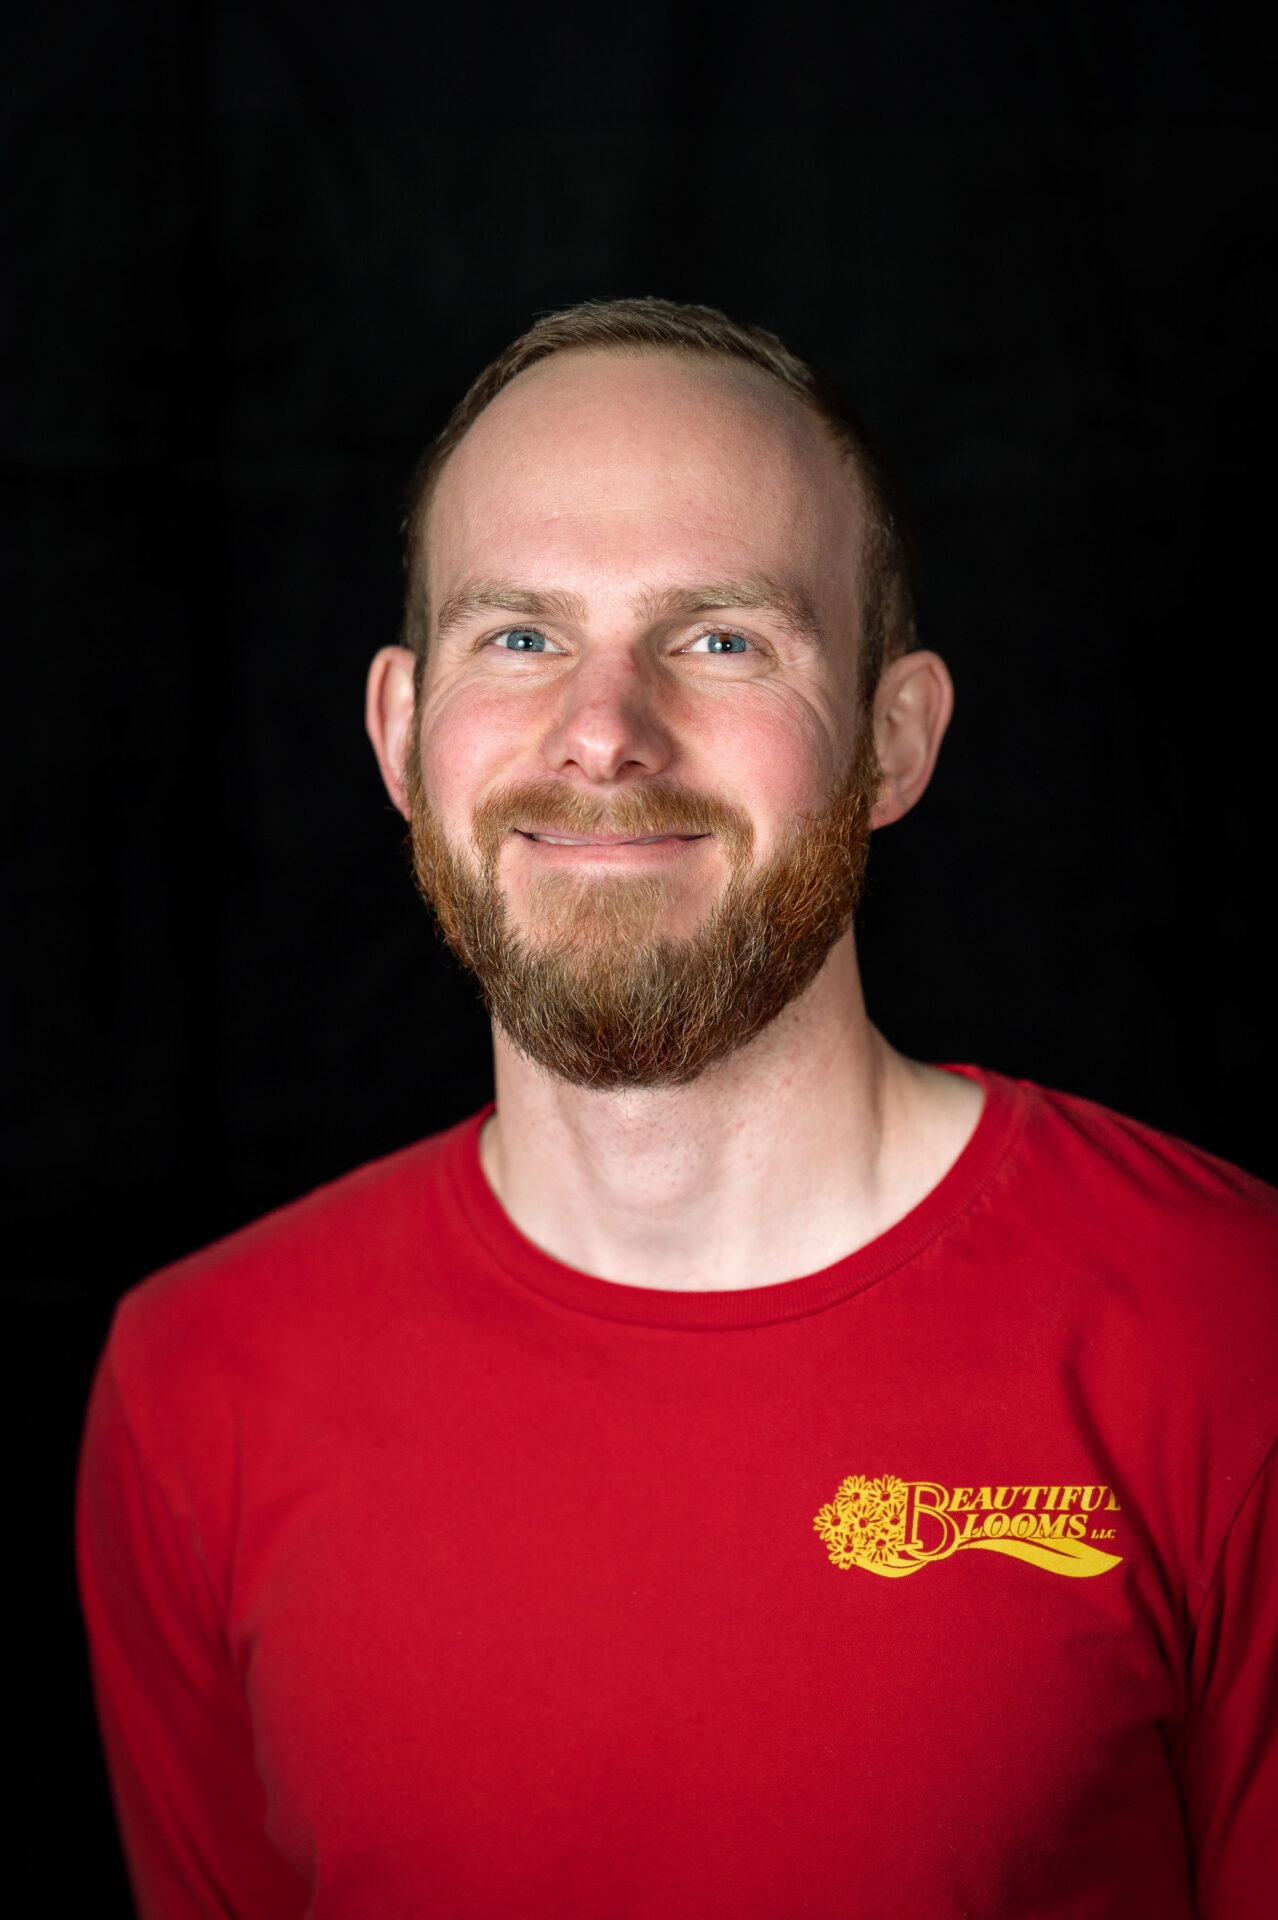 A person with a beard smiles warmly, wearing a red t-shirt with yellow text, set against a dark background in a portrait-style photograph.